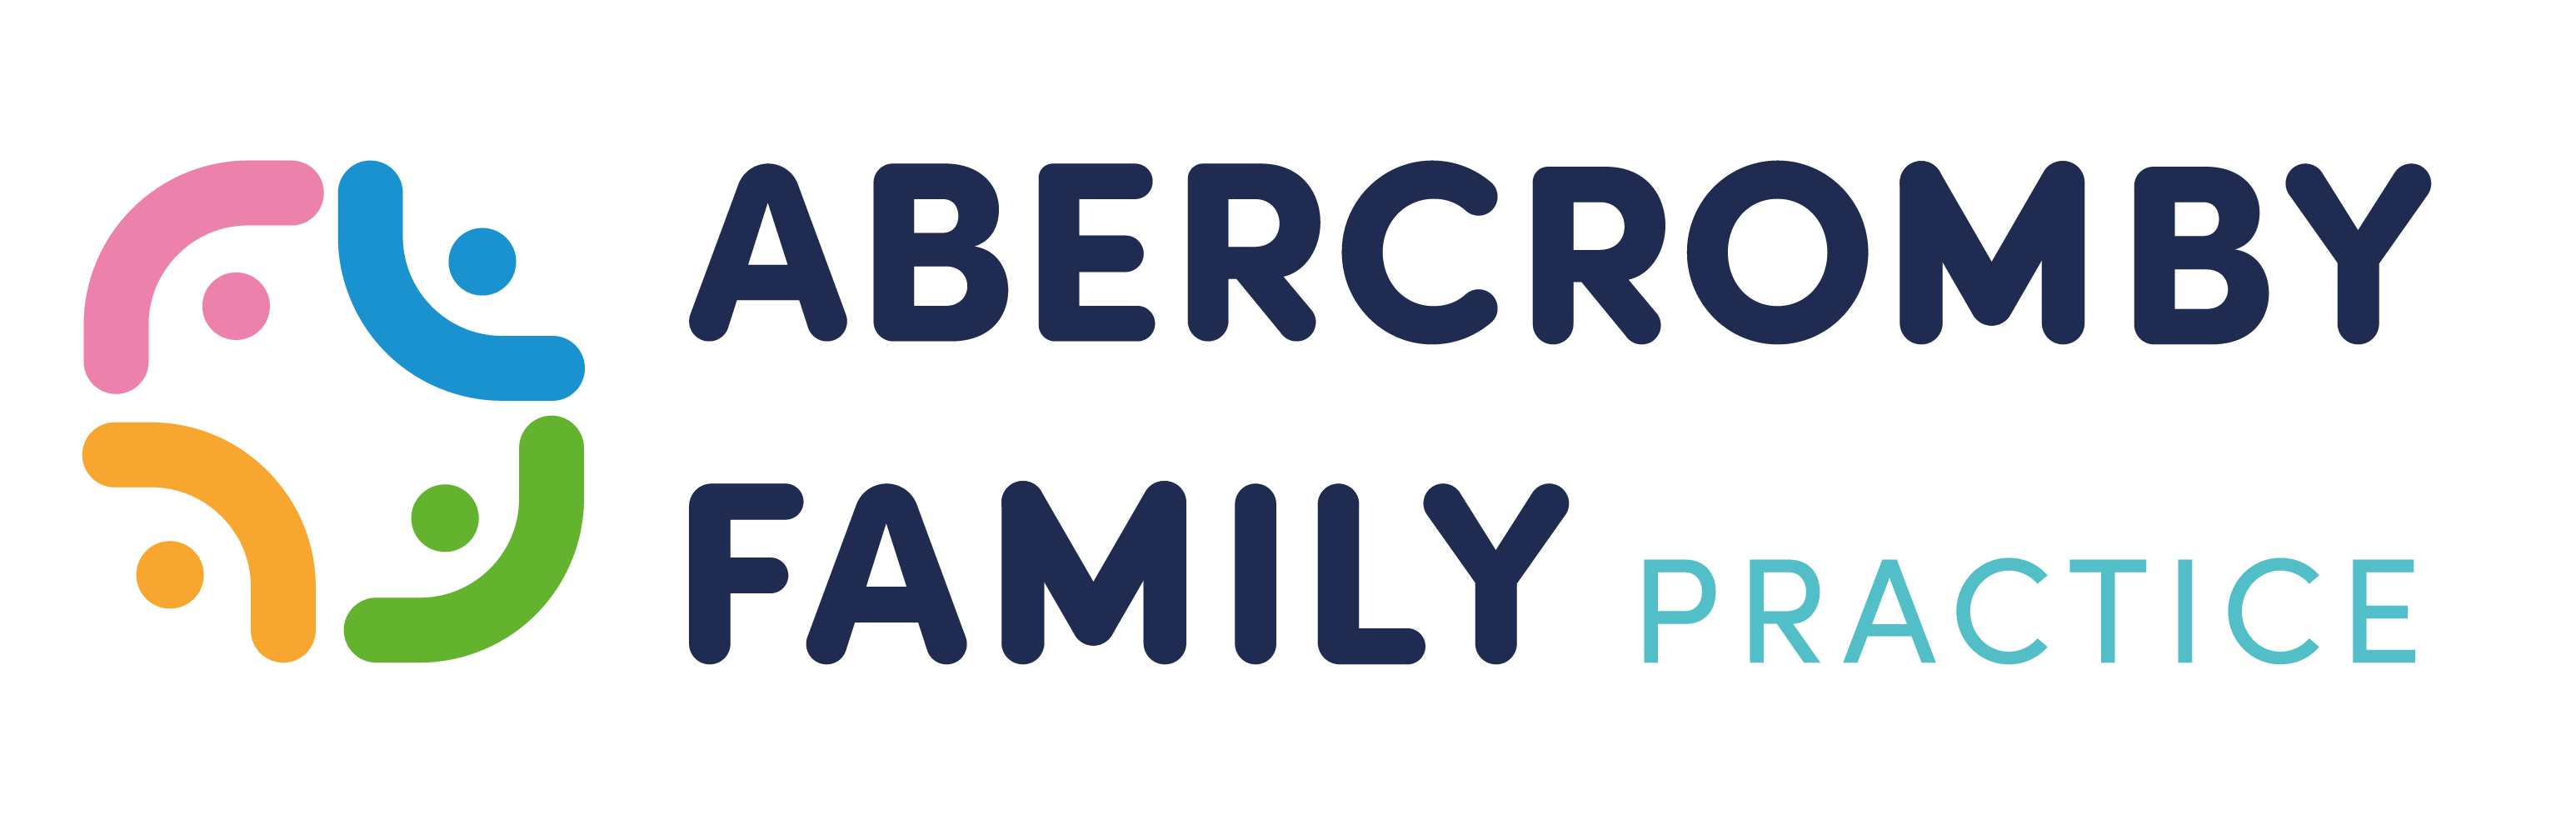 The logo for Abercromby Family Practice